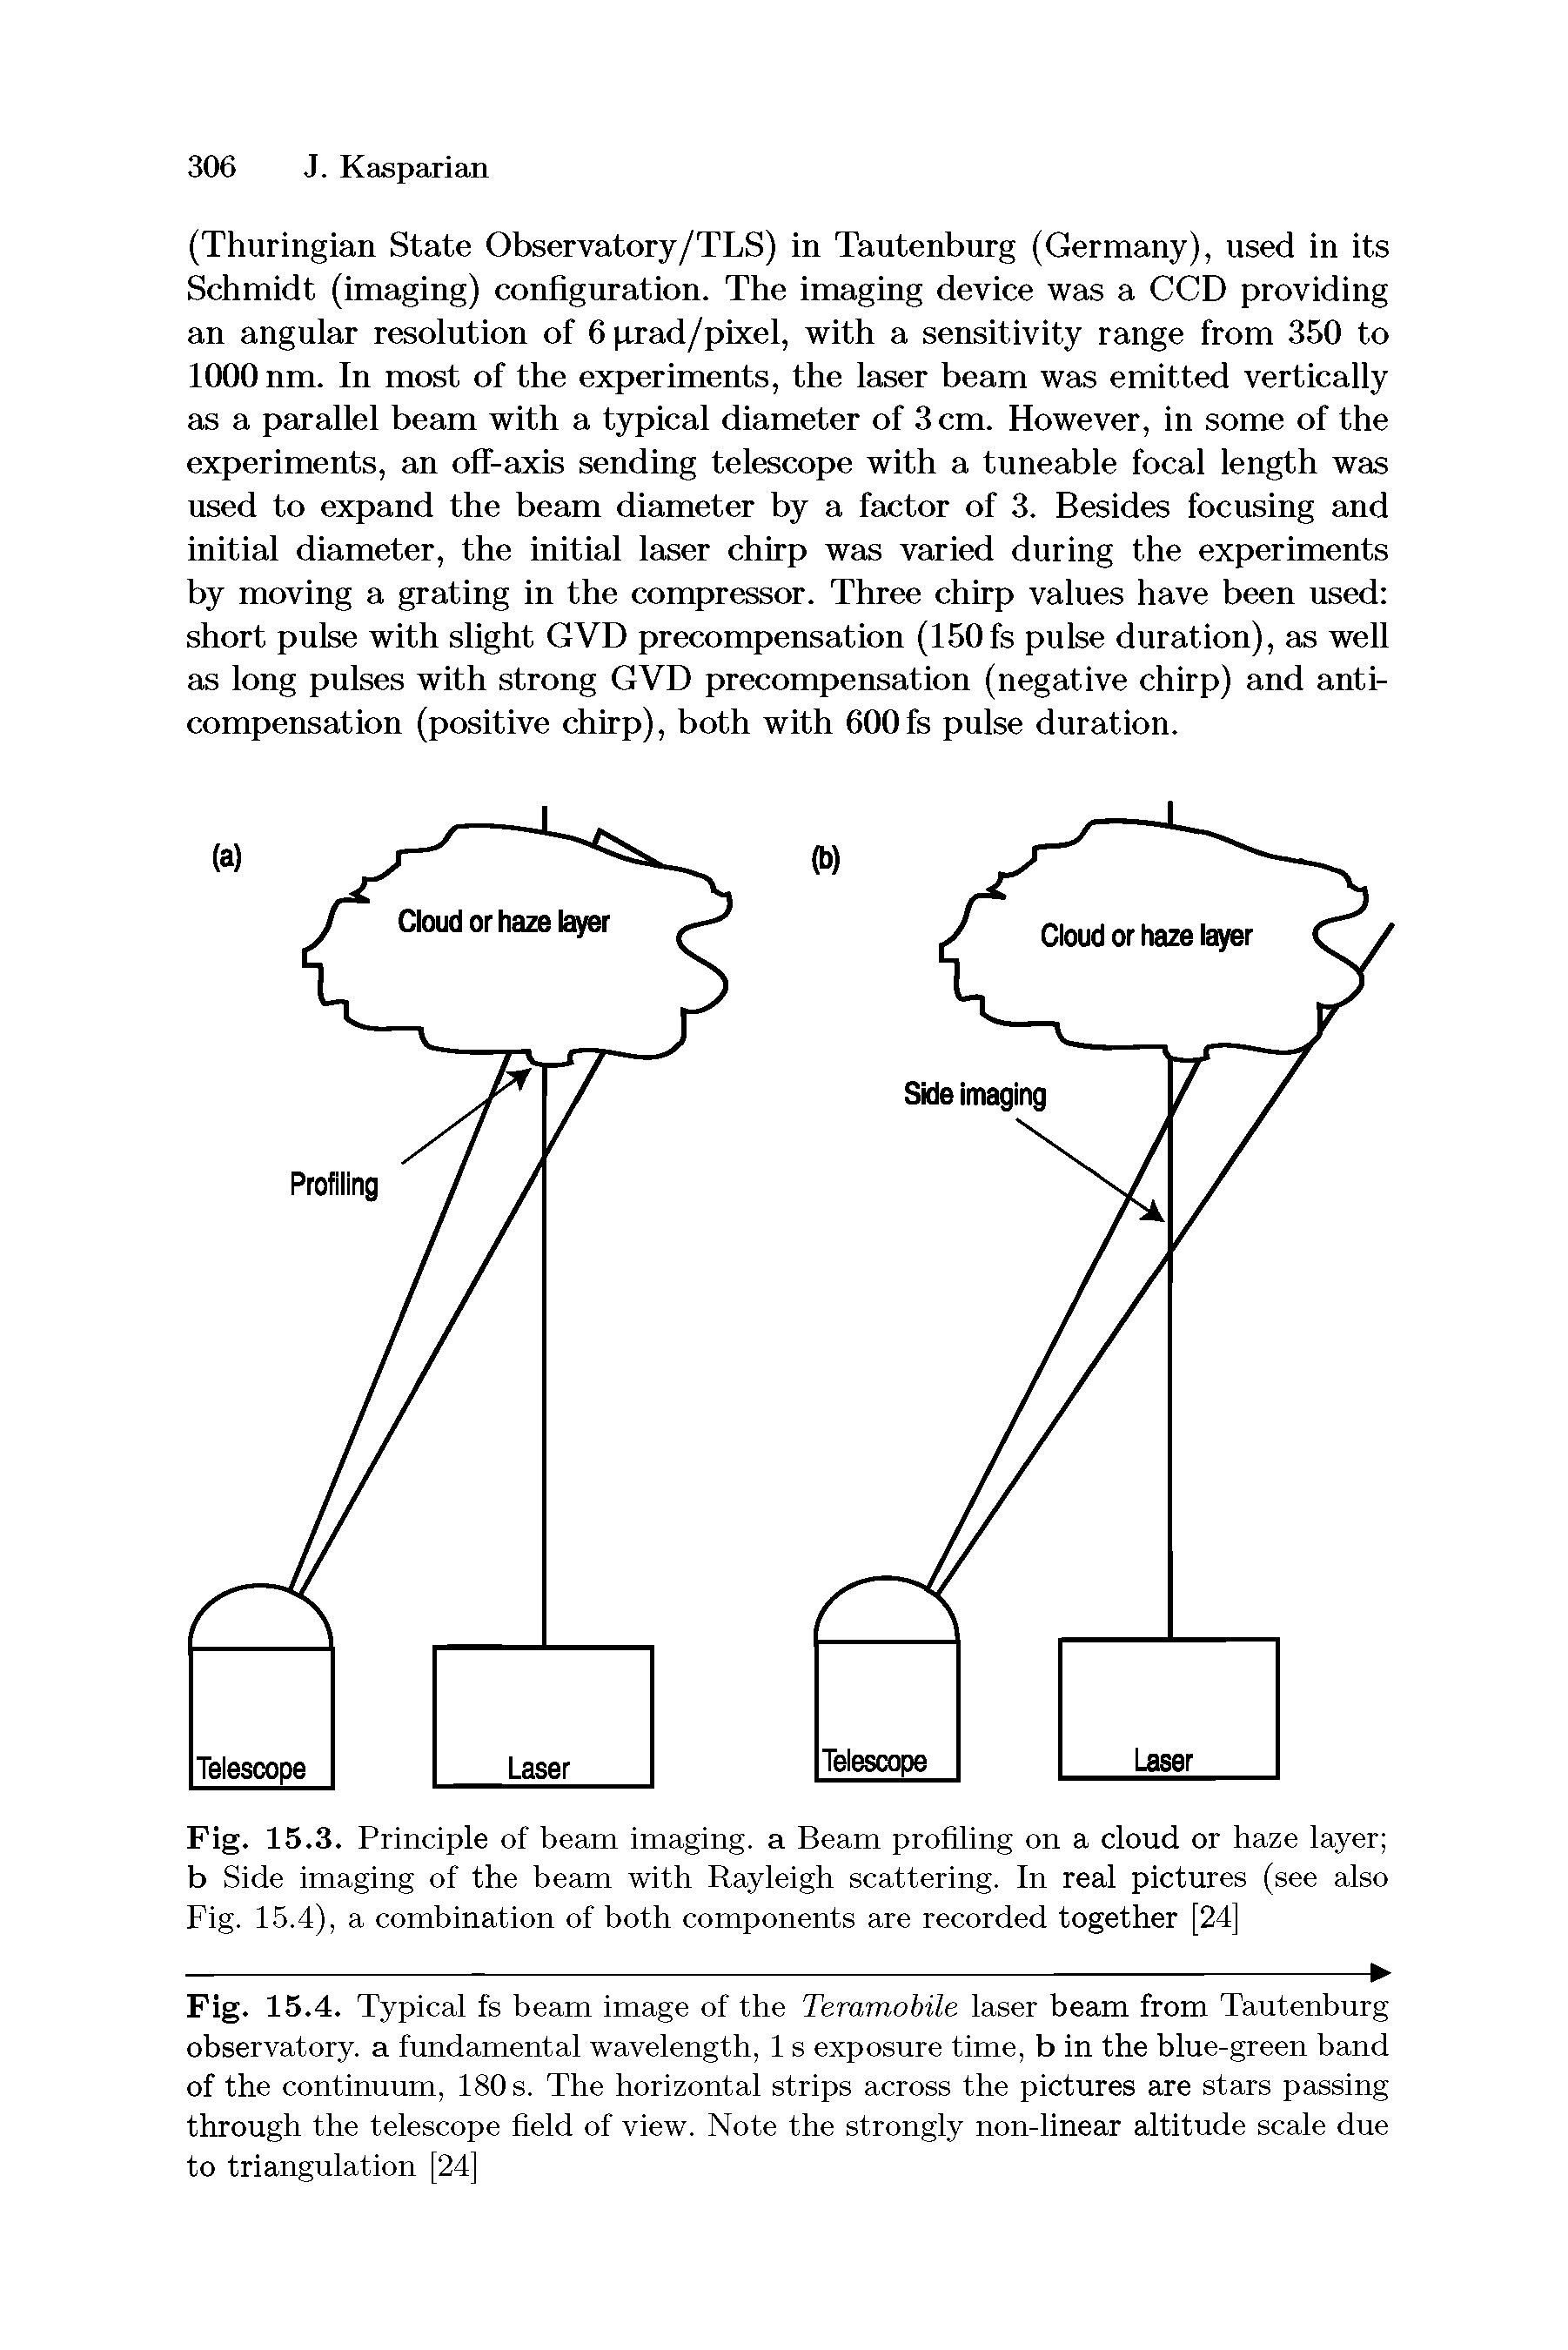 Fig. 15.3. Principle of beam imaging, a Beam profiling on a cloud or haze layer b Side imaging of the beam with Rayleigh scattering. In real pictures (see also Fig. 15.4), a combination of both components are recorded together [24]...